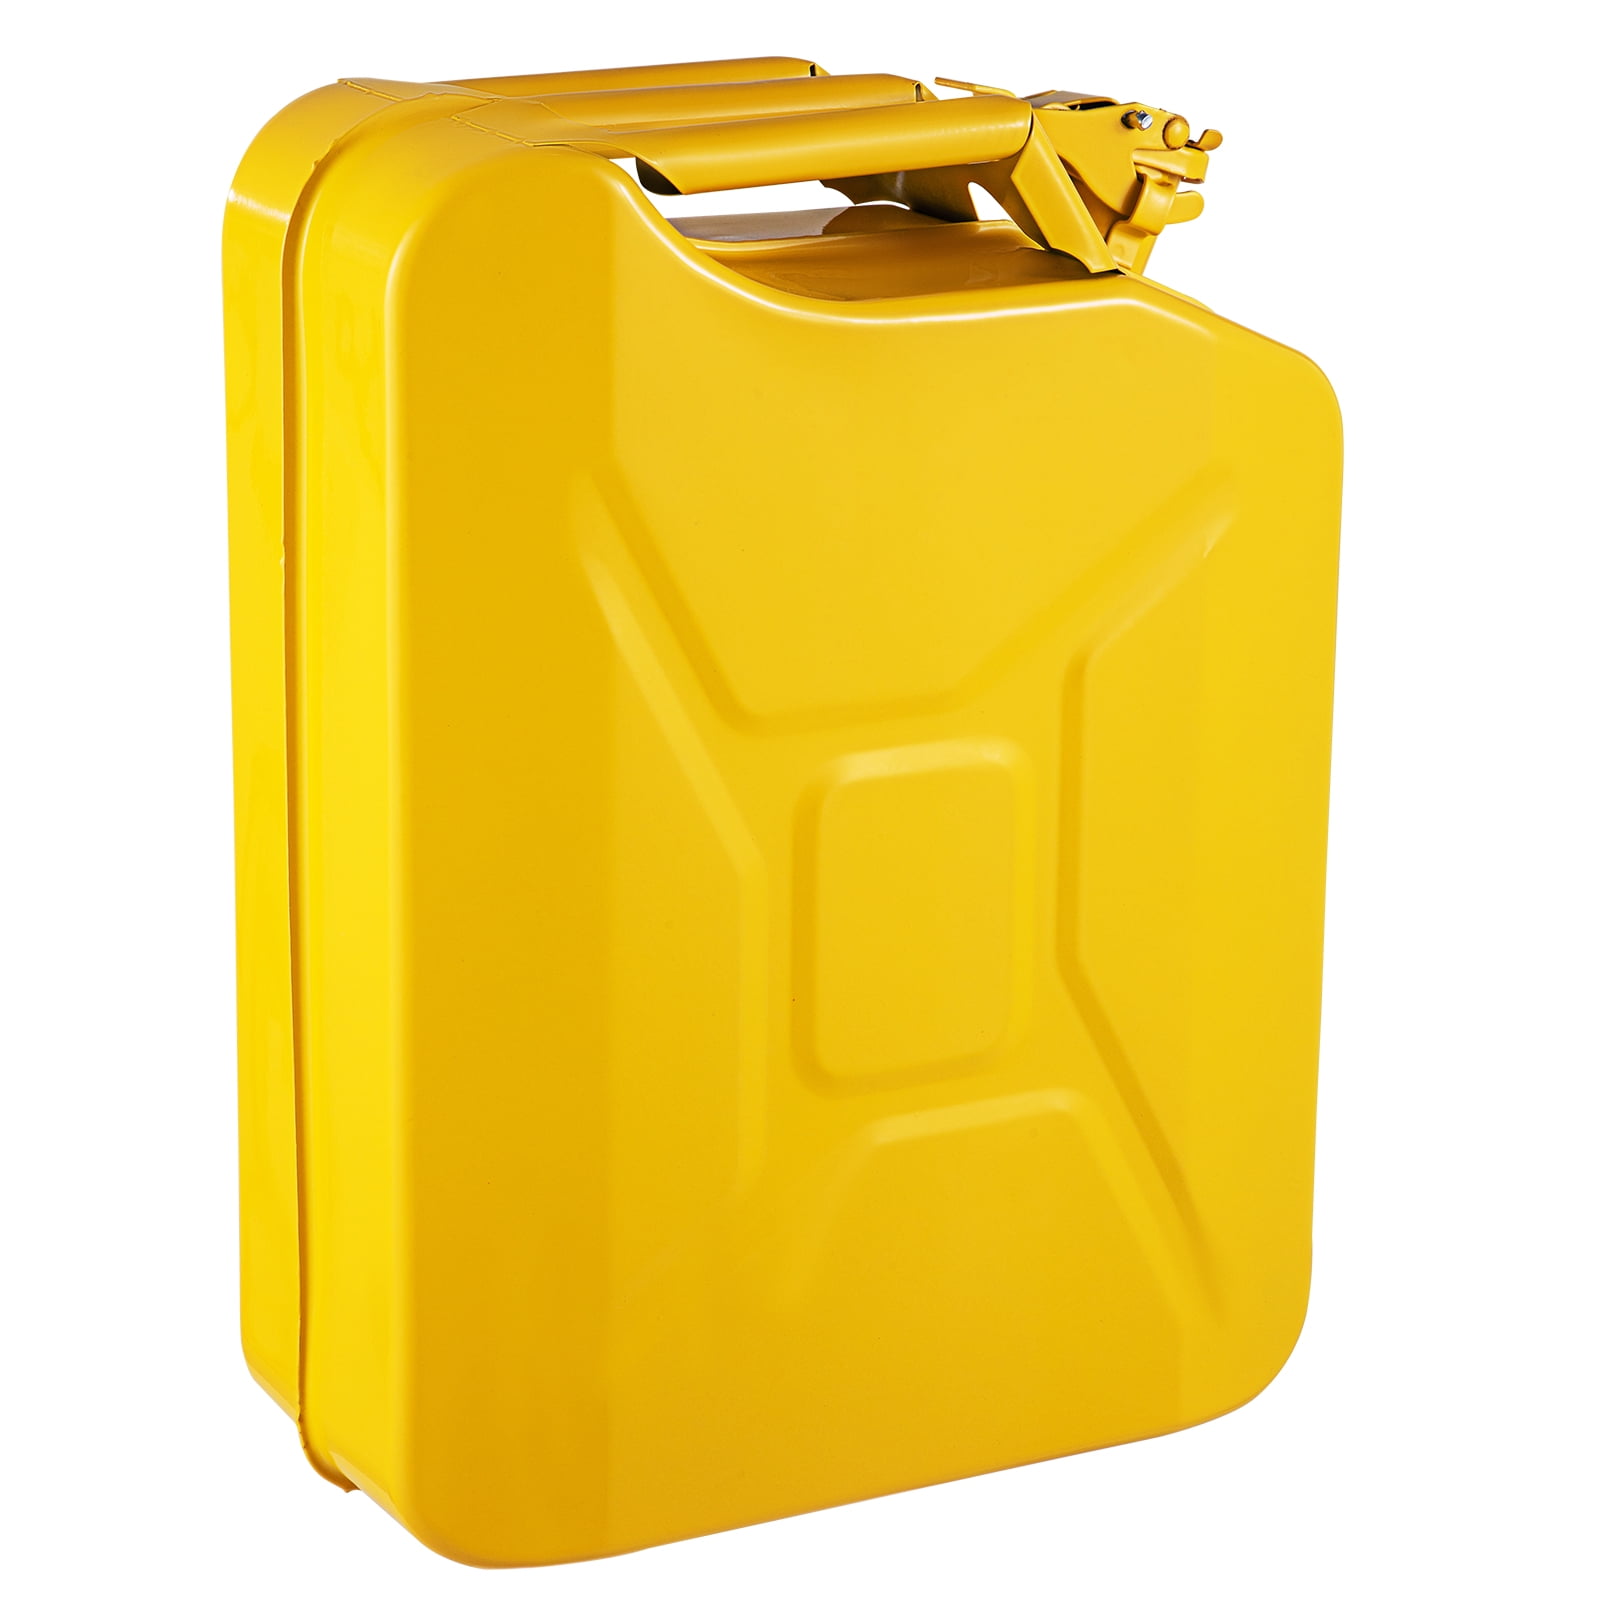 Jerry Can 20ltr Polished Stainless Steel. Fuel, Petrol, Diesel, Oil, Water.  Compact Pattern. - Winchmax